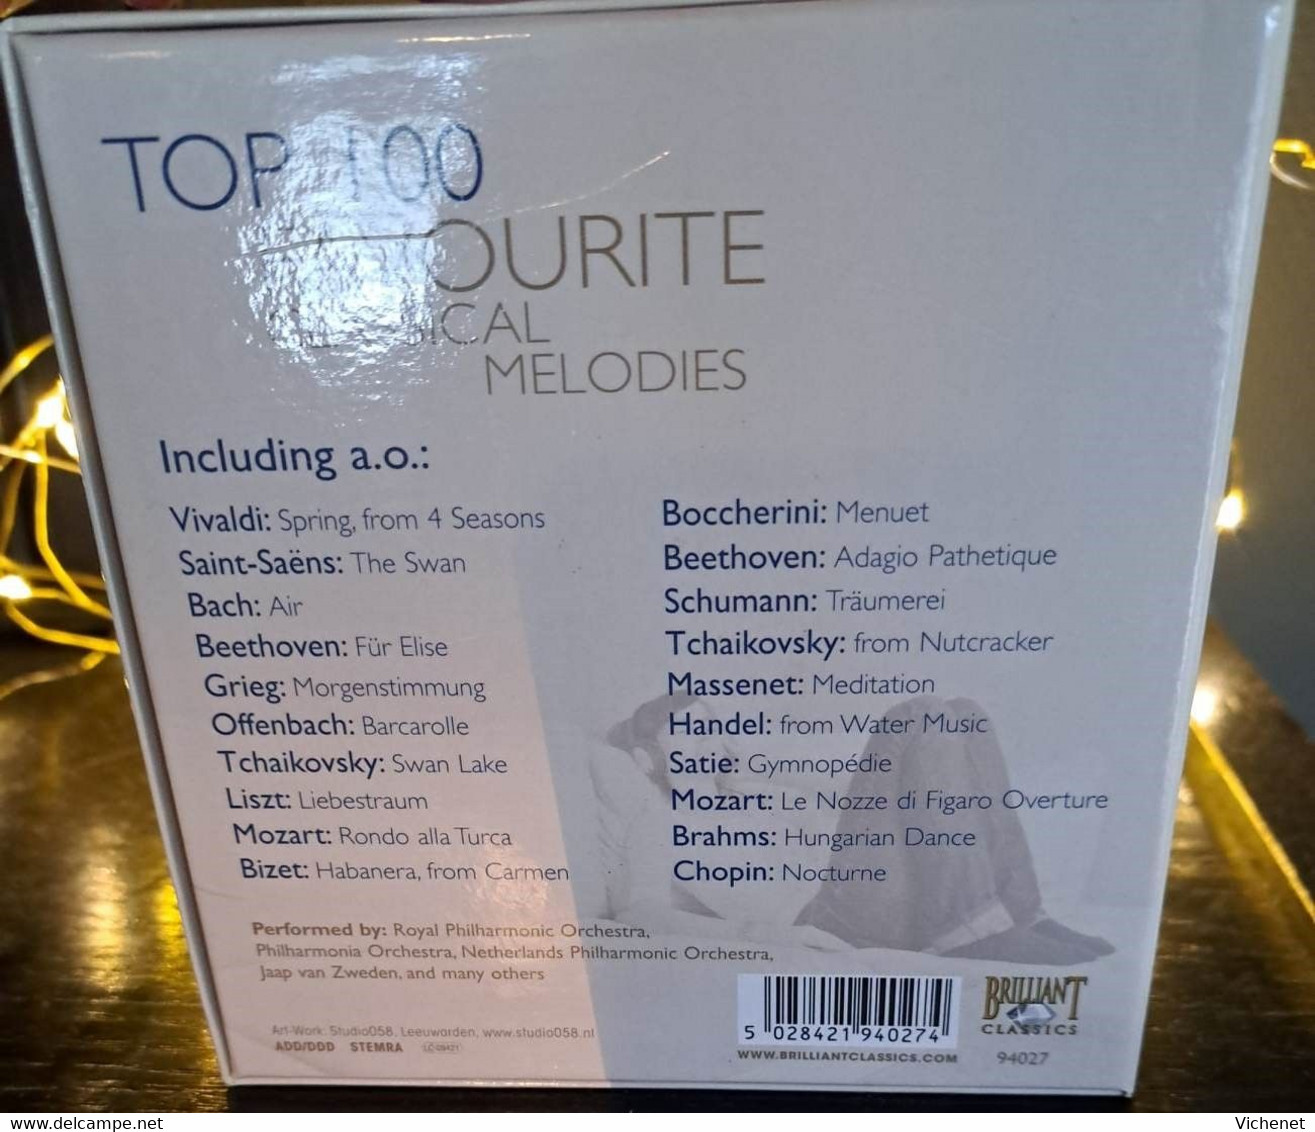 Top 100 Favourite Classical Melodies (5 CD's) - Compilations